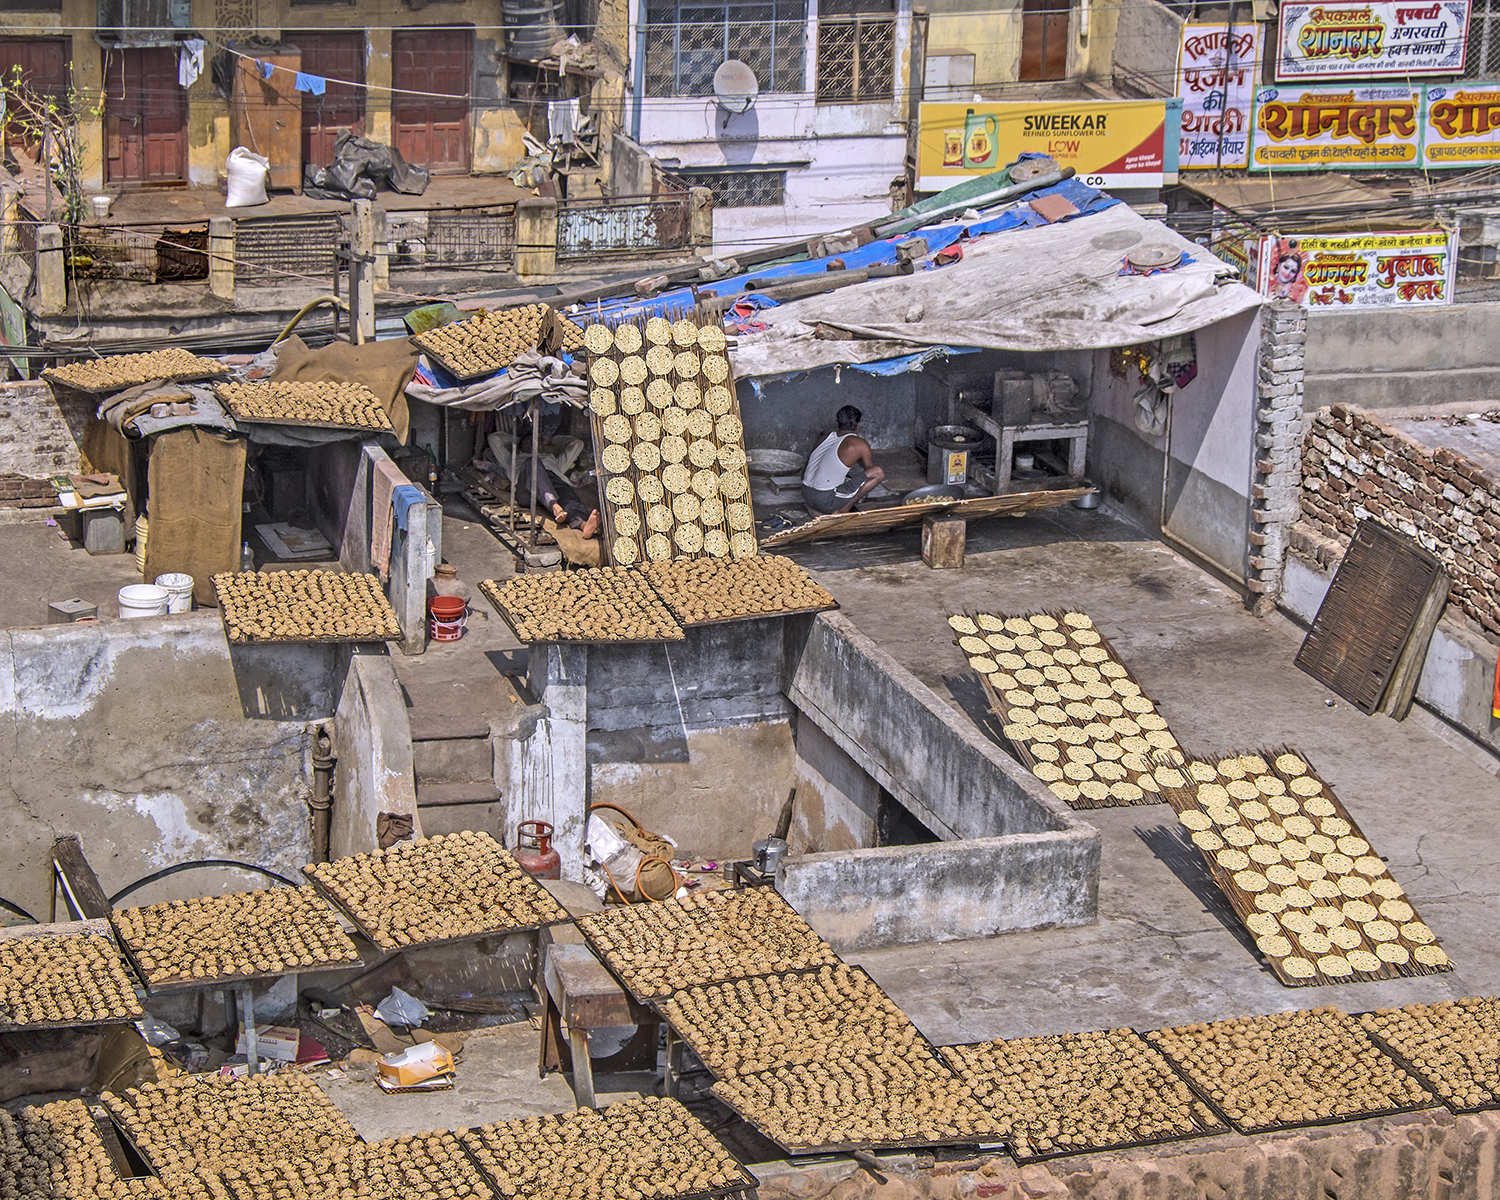 Cooling Baked Goods, Khari Baoli Rooftop, Chandni Chowk, Old Delhi, India<p><a class="nav-link" href="/content.html?page=6/#TA63" target="_top">Thumbnail</a>